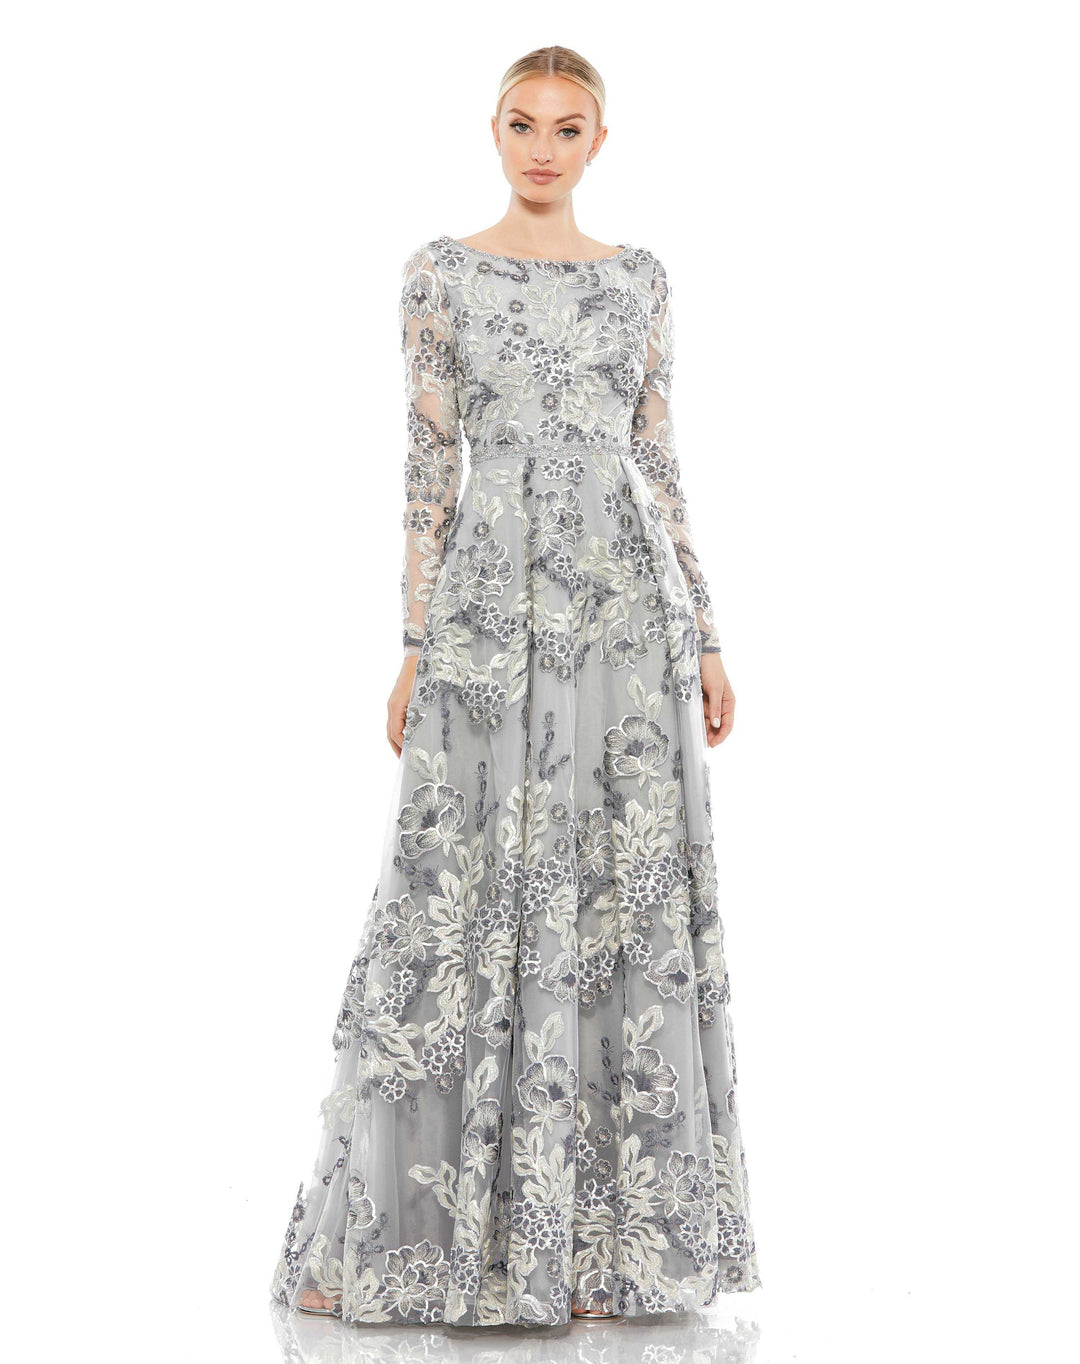 Floral Embellished Illusion Sleeve A-Line Gown – Mac Duggal